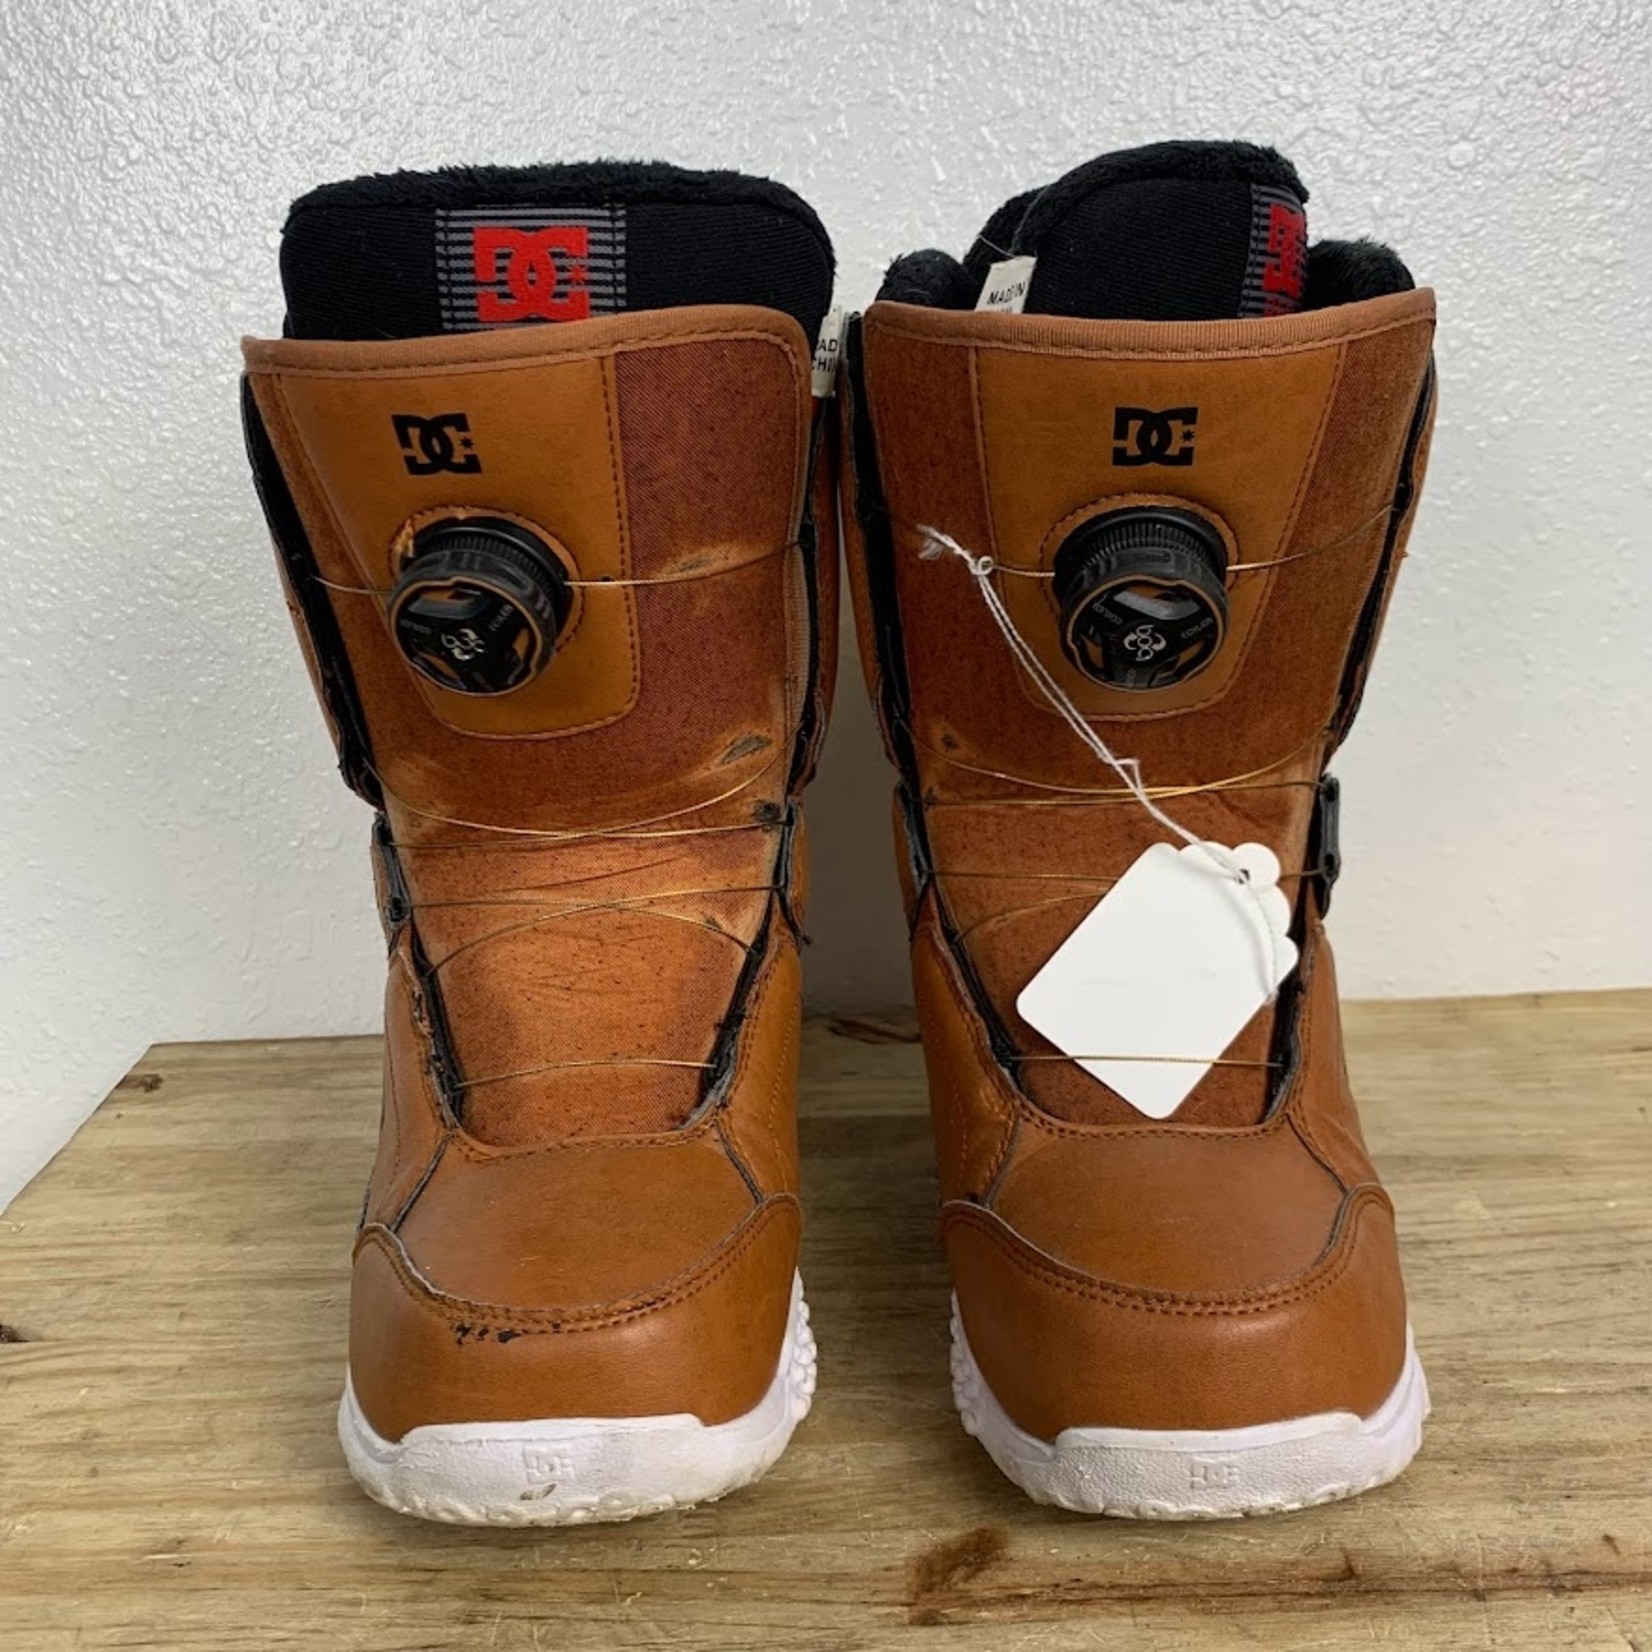 DC 2018 DC Search Boa Snowboard Boots, Size 6 WMNS